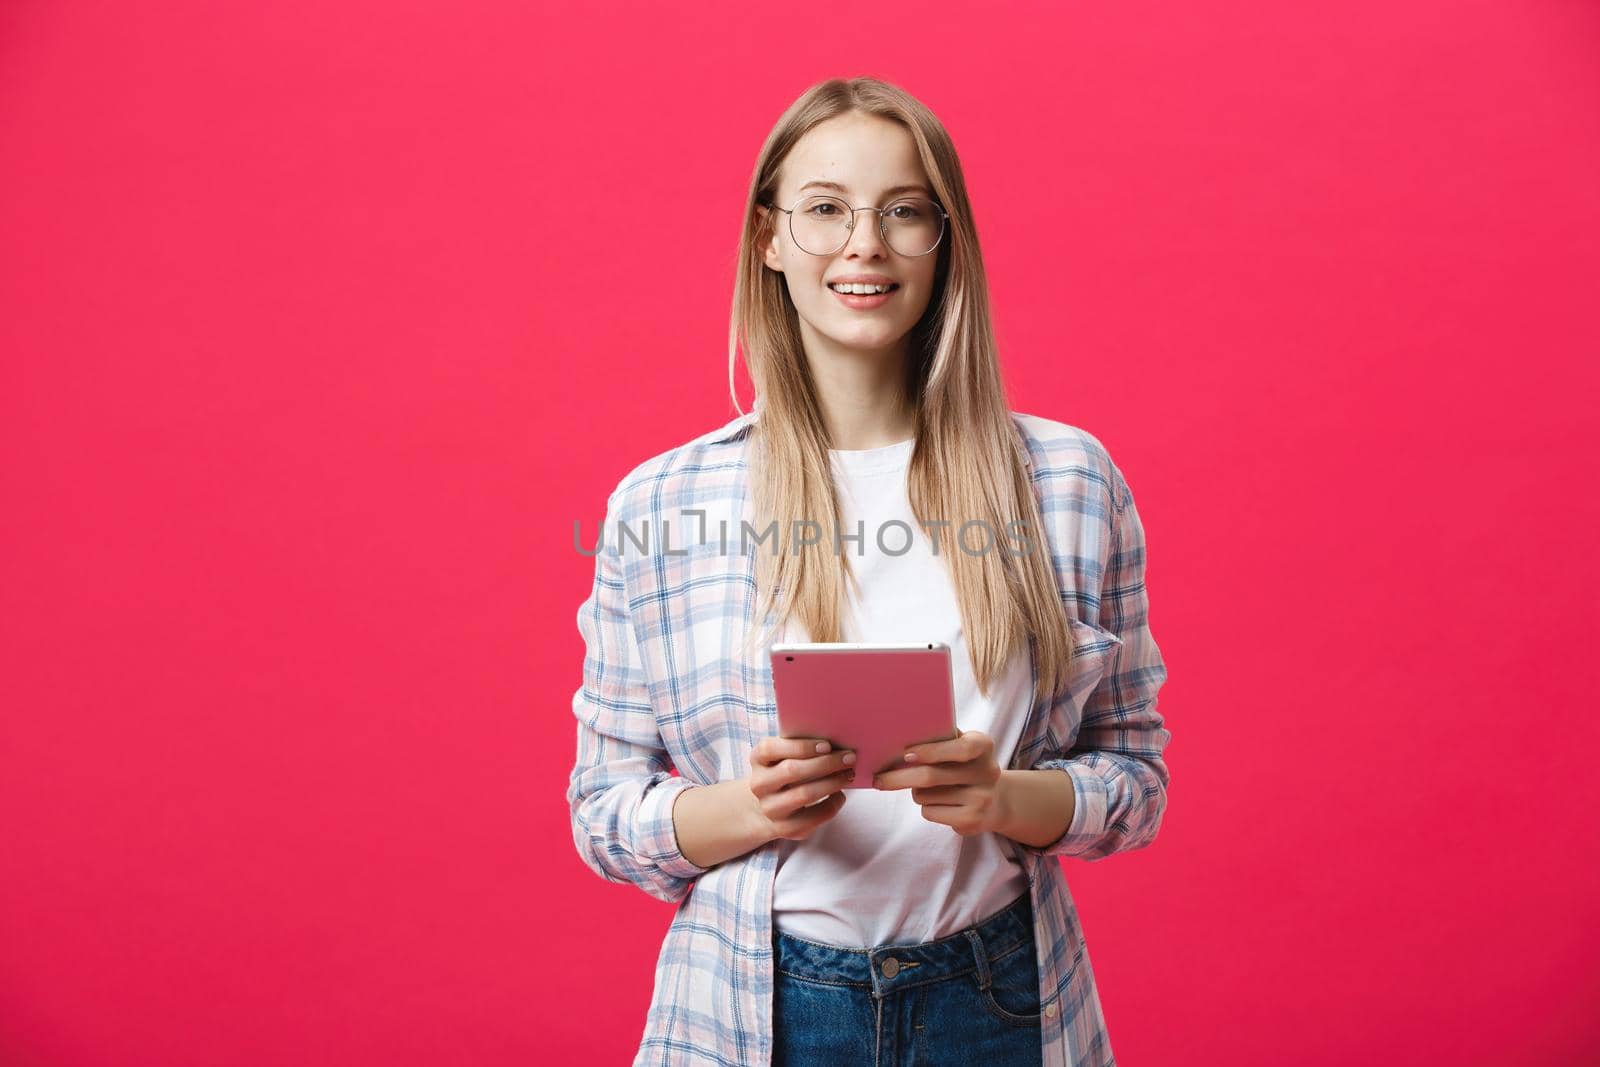 Portrait of a laughing woman using tablet computer isolated on a pink background and looking at camera.